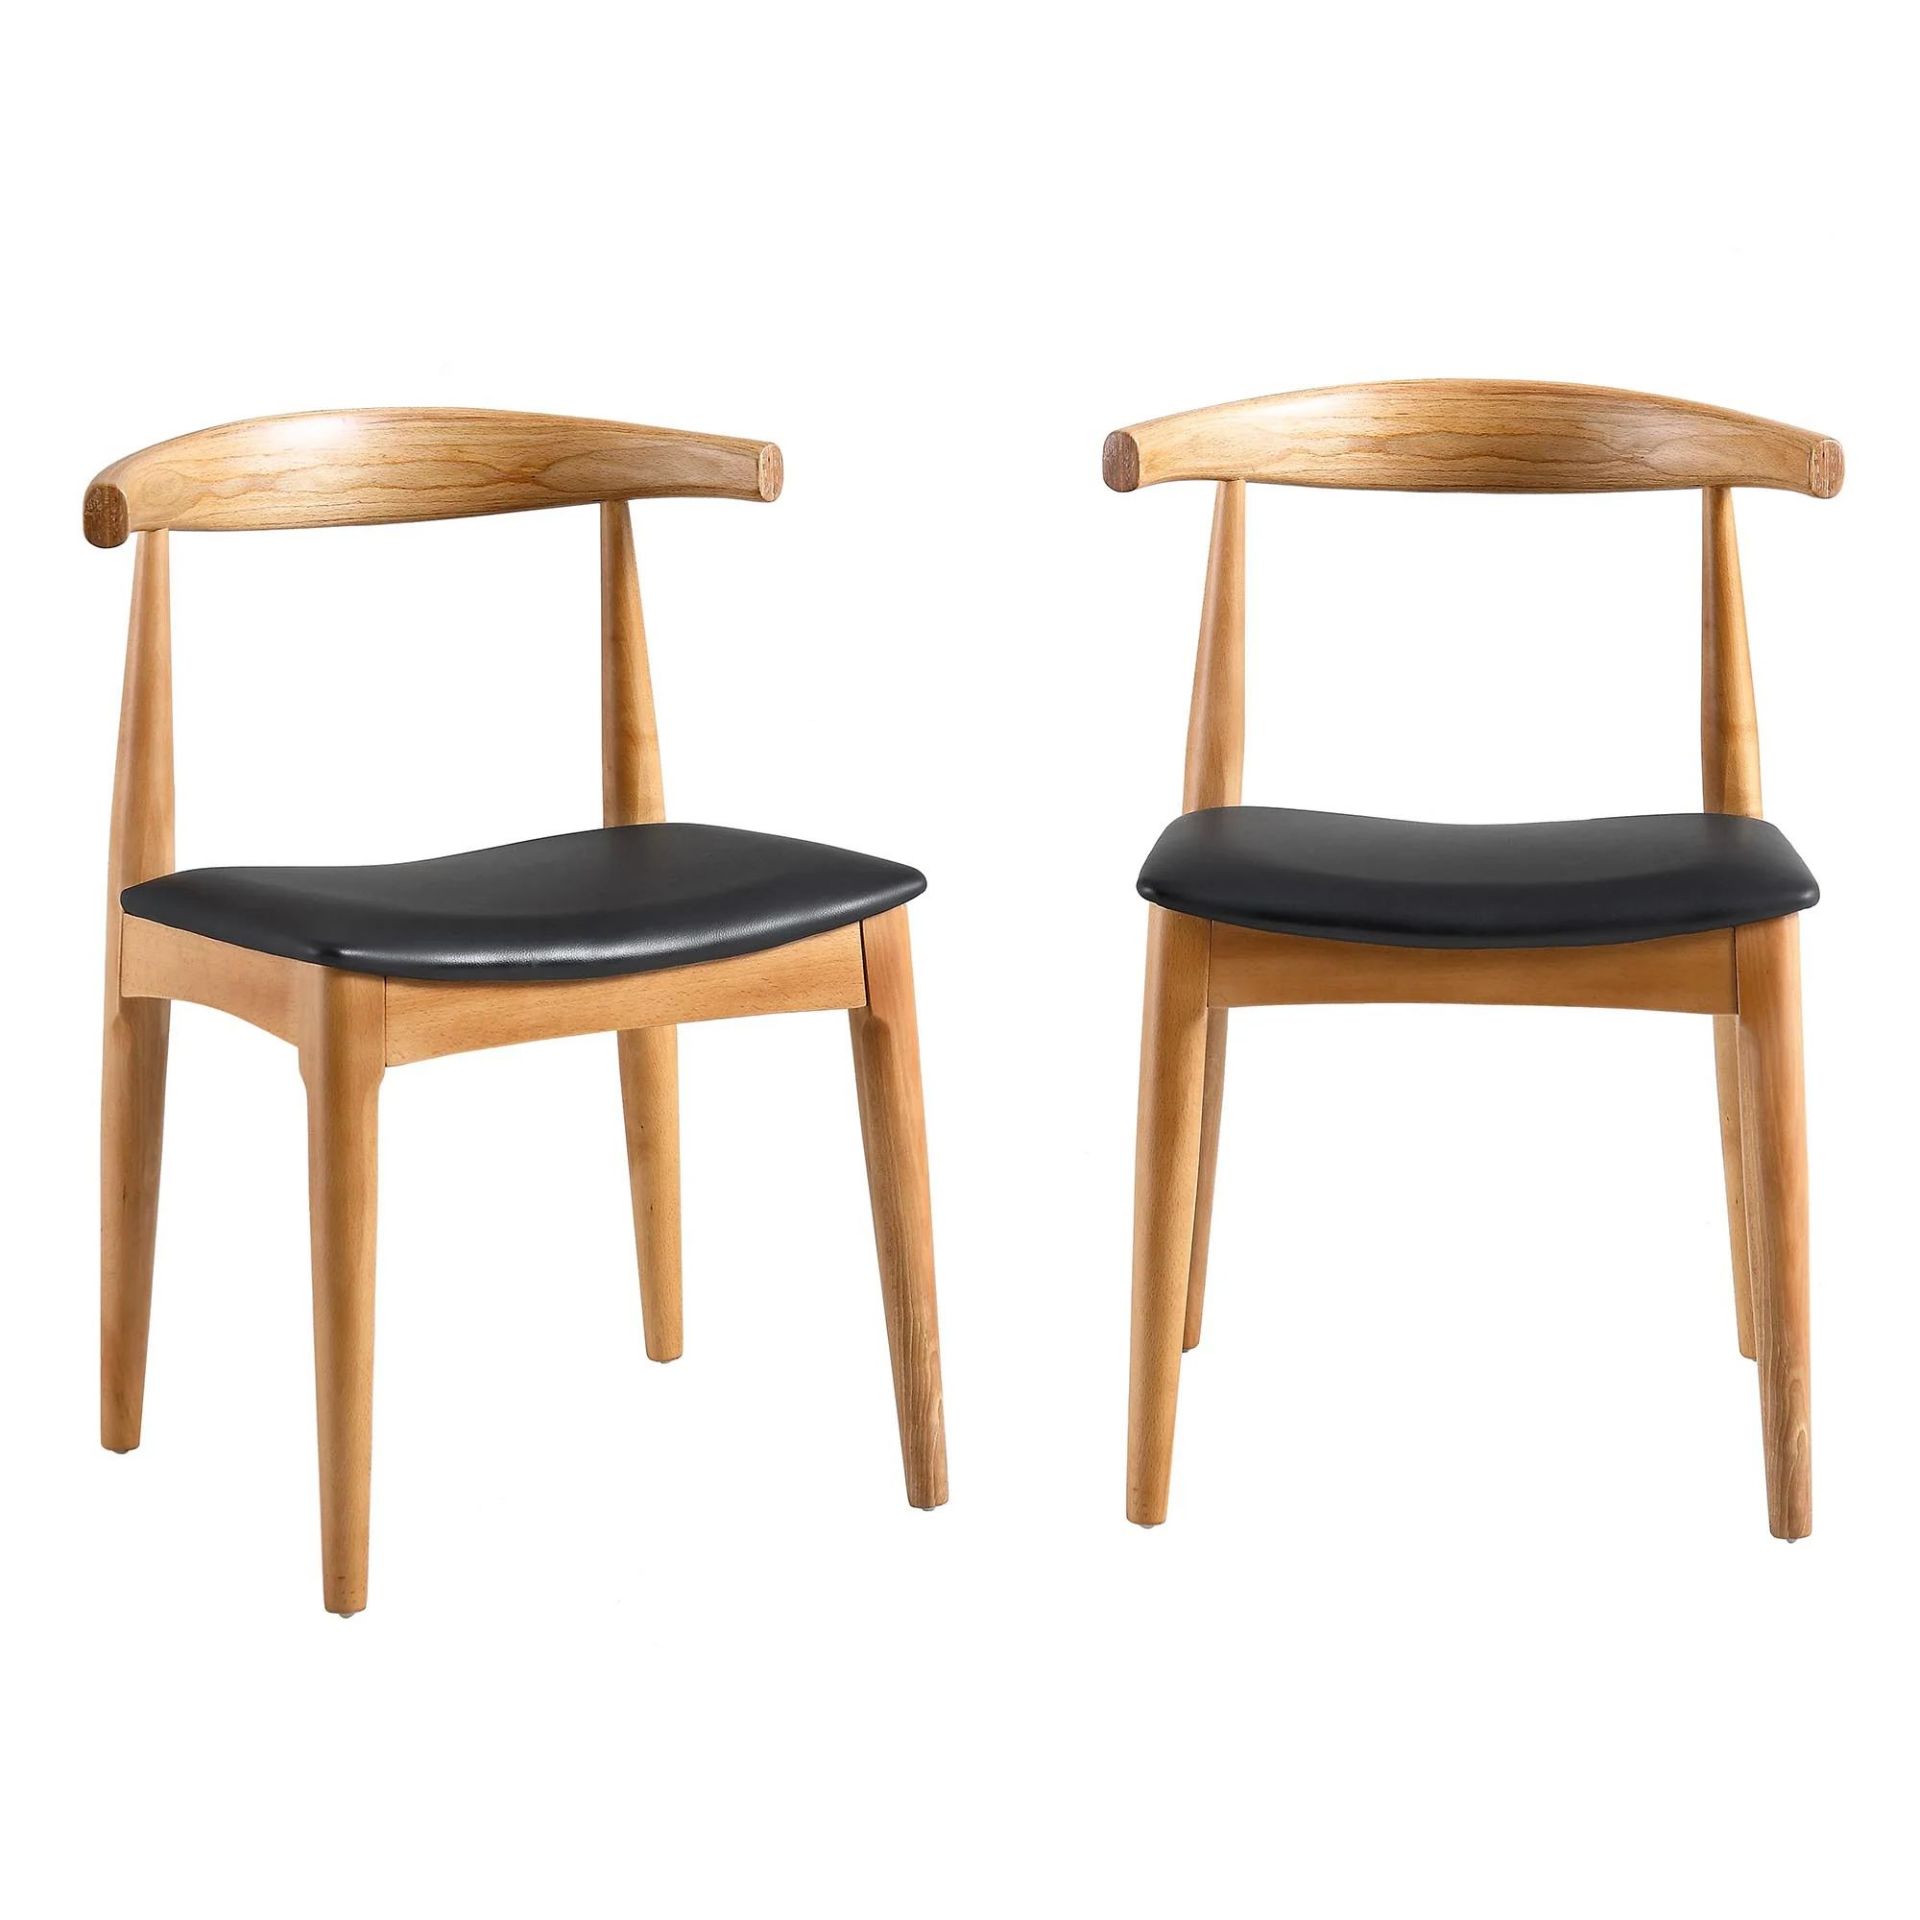 Arley Set of 2 Beech Wood Dining Chairs, Natural and Black. - R14. RRP £289.99. The wood frame is - Image 2 of 2